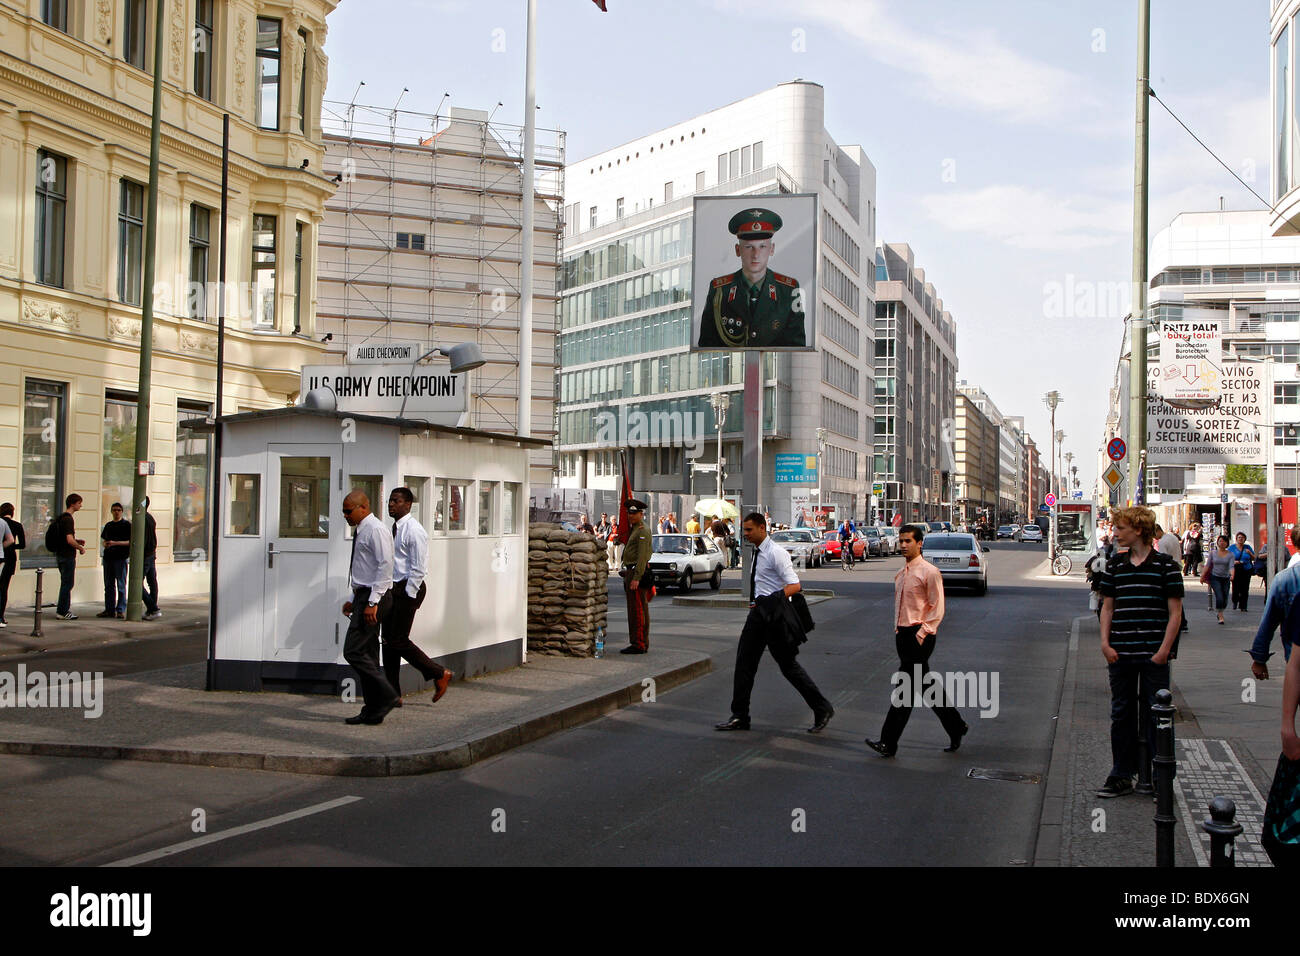 Checkpoint Charlie, former border crossing, Berlin, Germany, Europe Stock Photo